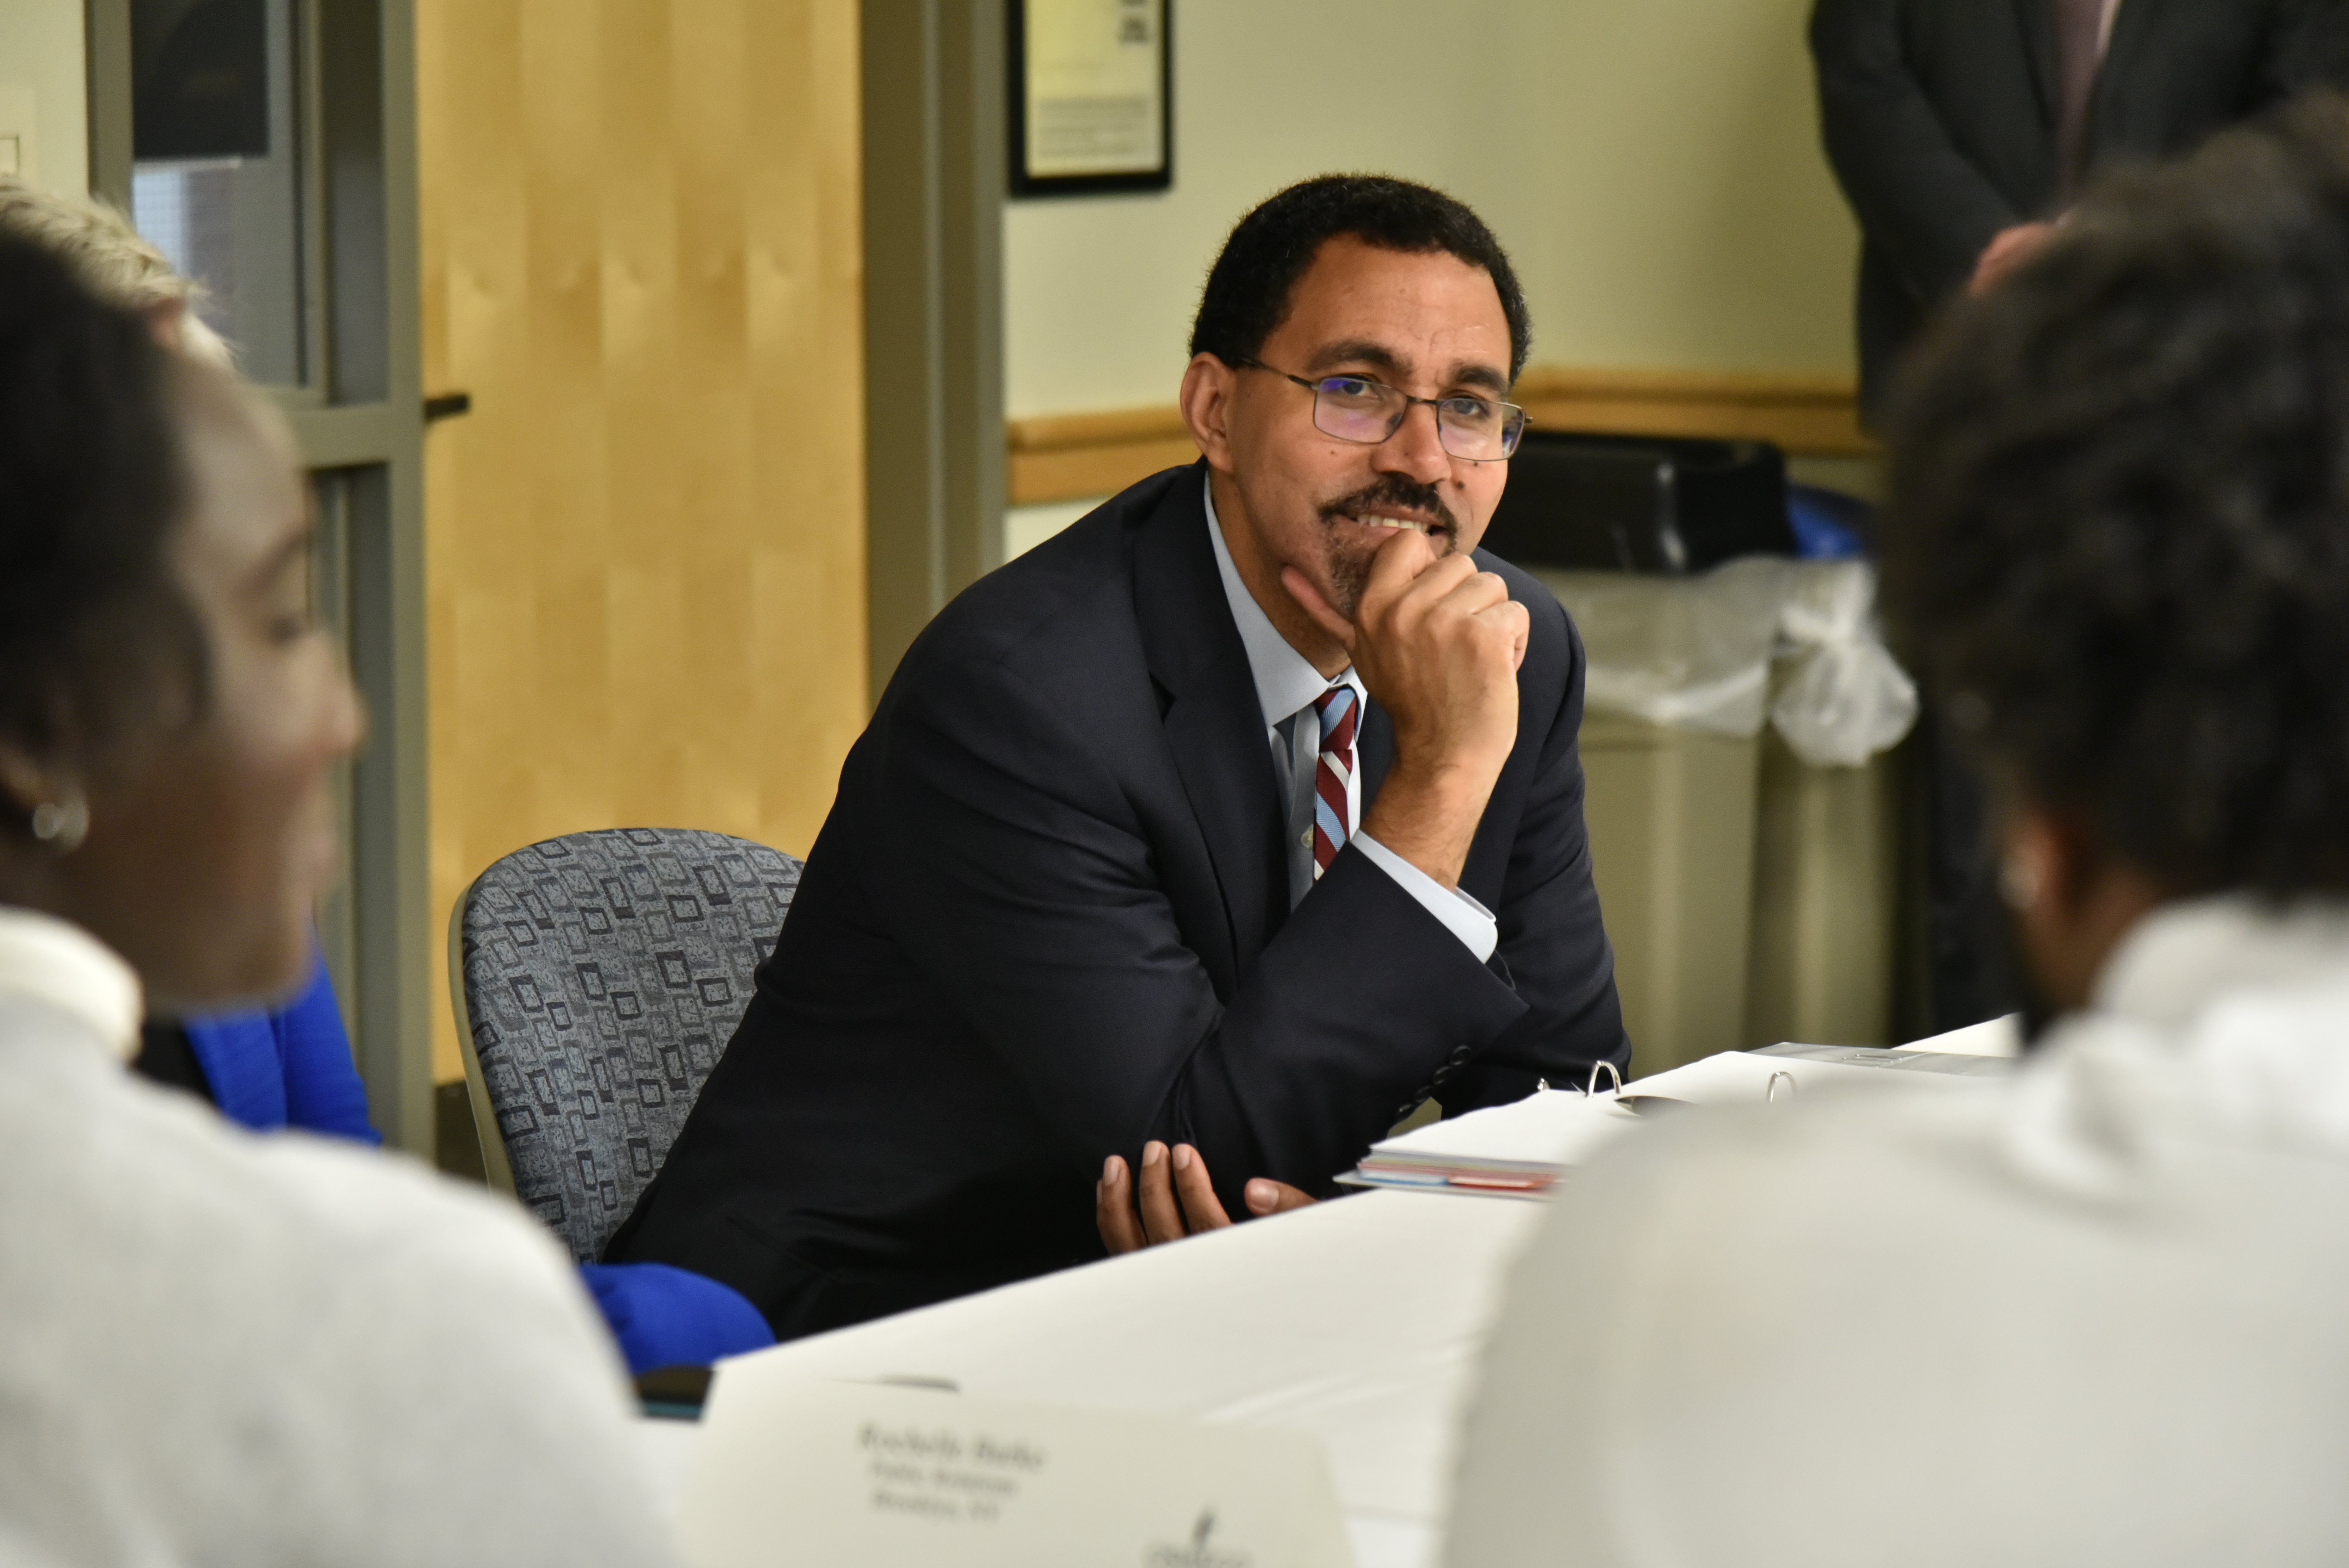 Chancellor John B. King Jr. listens intently as students introduce and talk a little about themselves